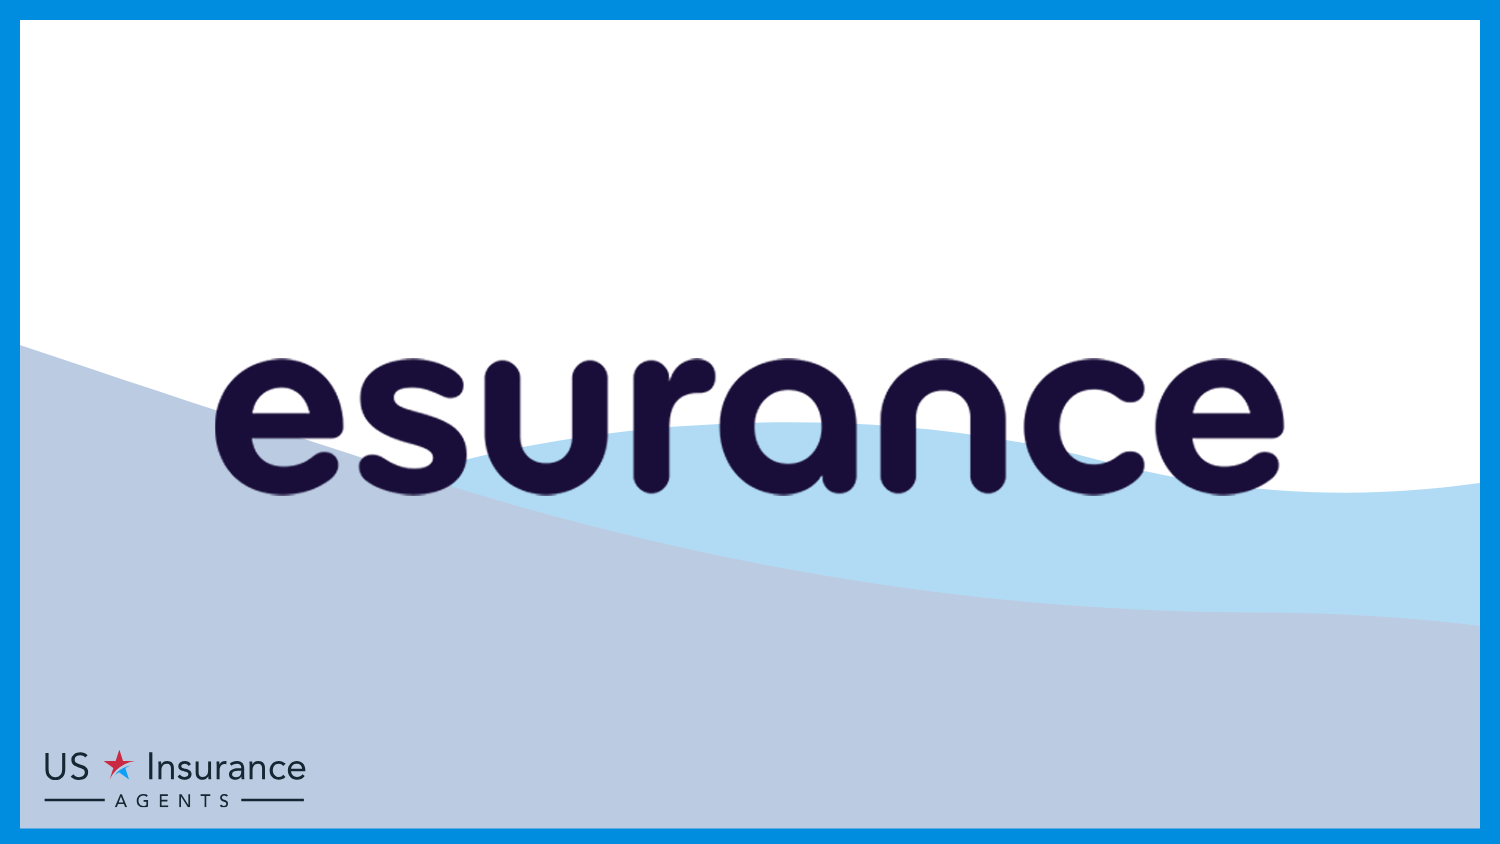 Esurance: Best Car Insurance for Young Adults